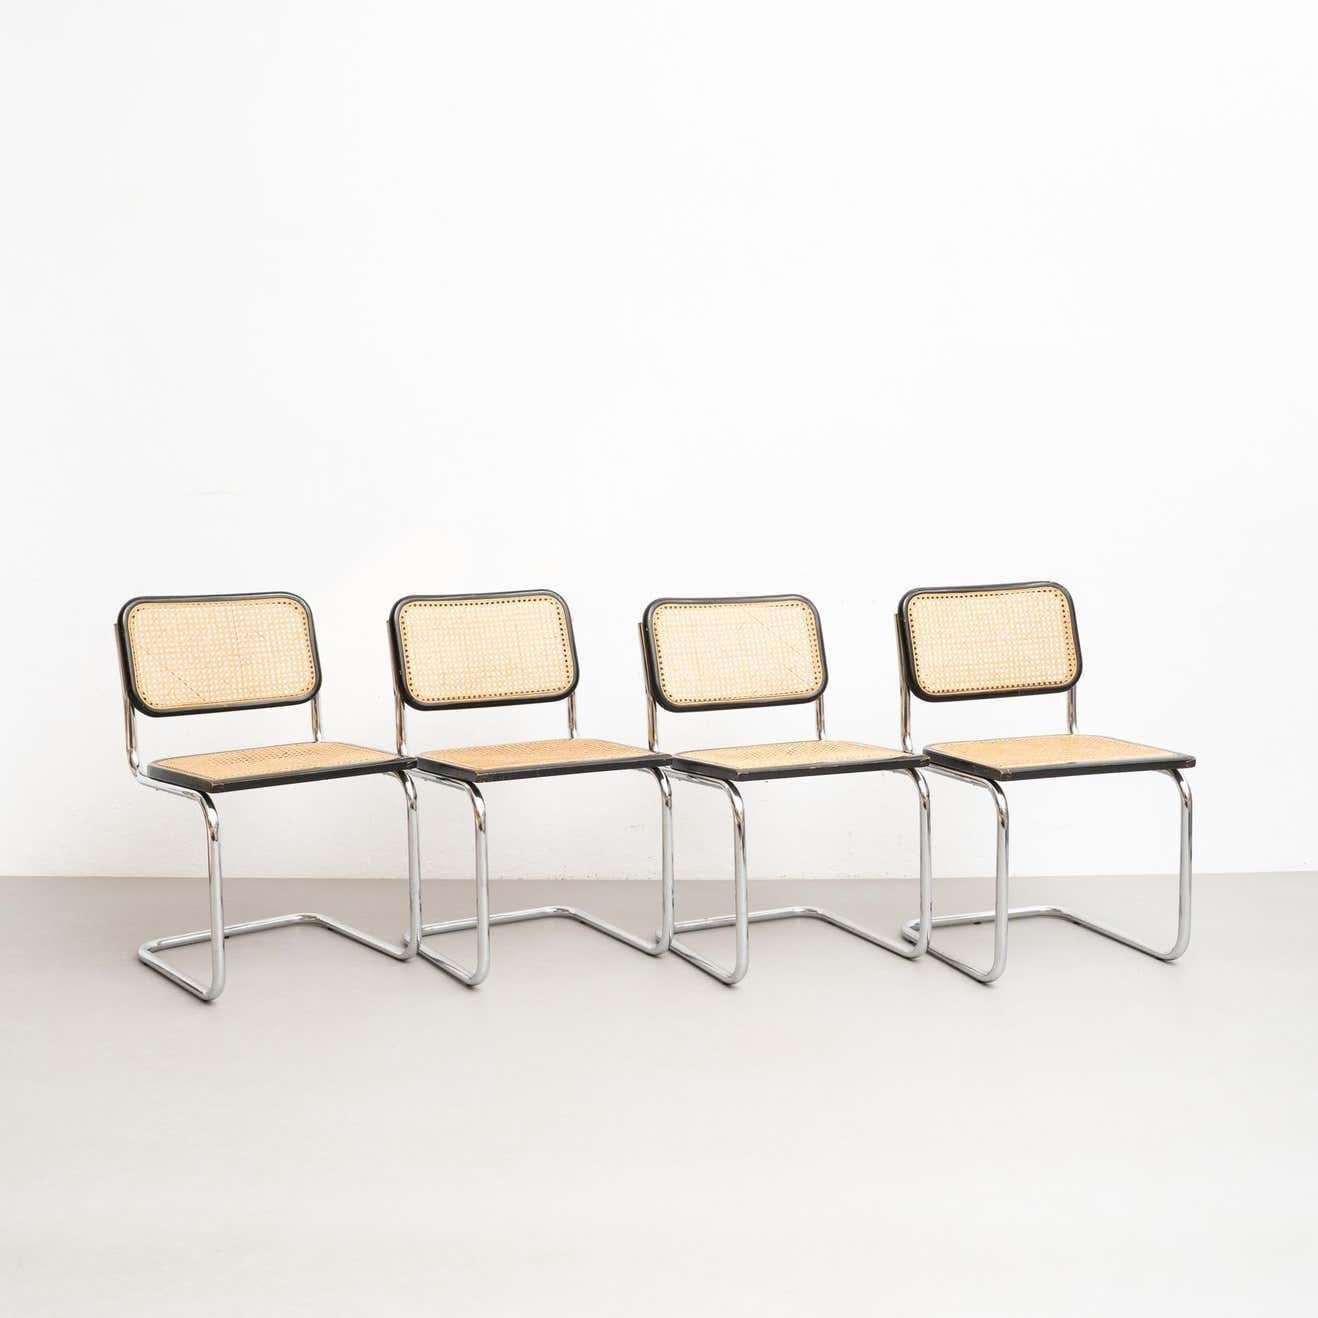 Set of 4 Marcel Breuer Cesca Metal and Wood Mid-Century Modern Chairs, c 1960 In Good Condition For Sale In Barcelona, Barcelona